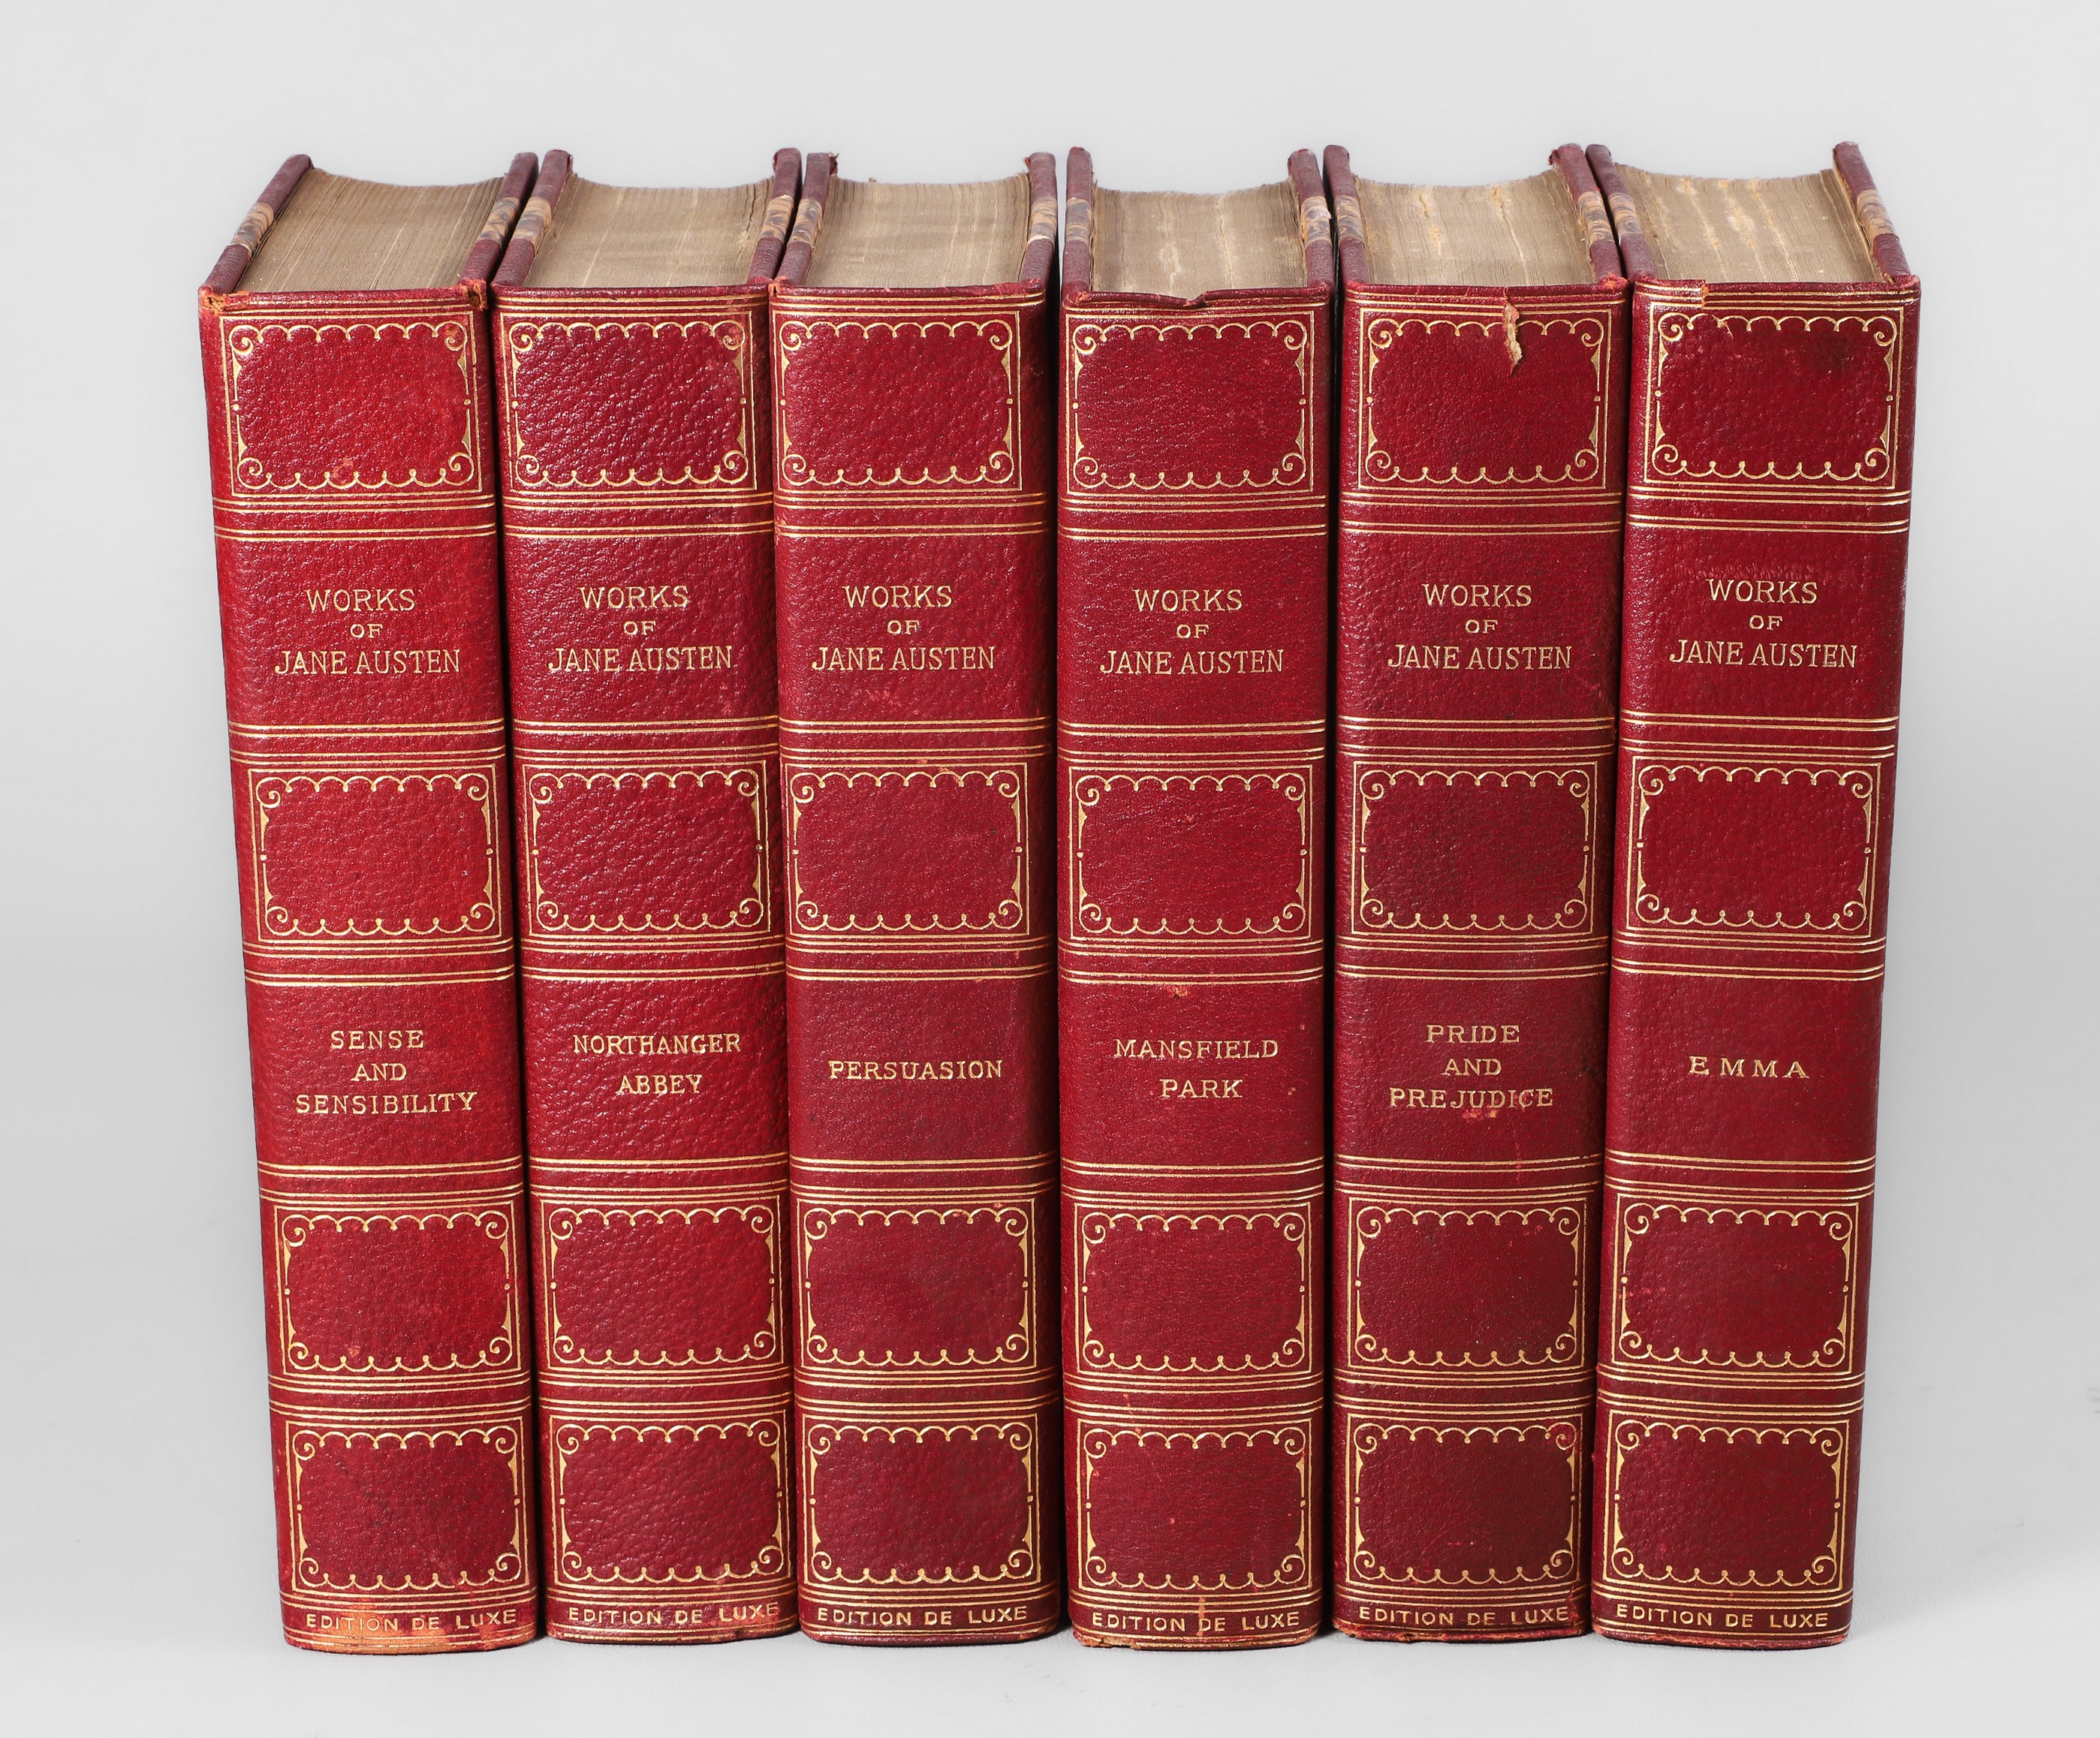 A six-volume set of The Works of